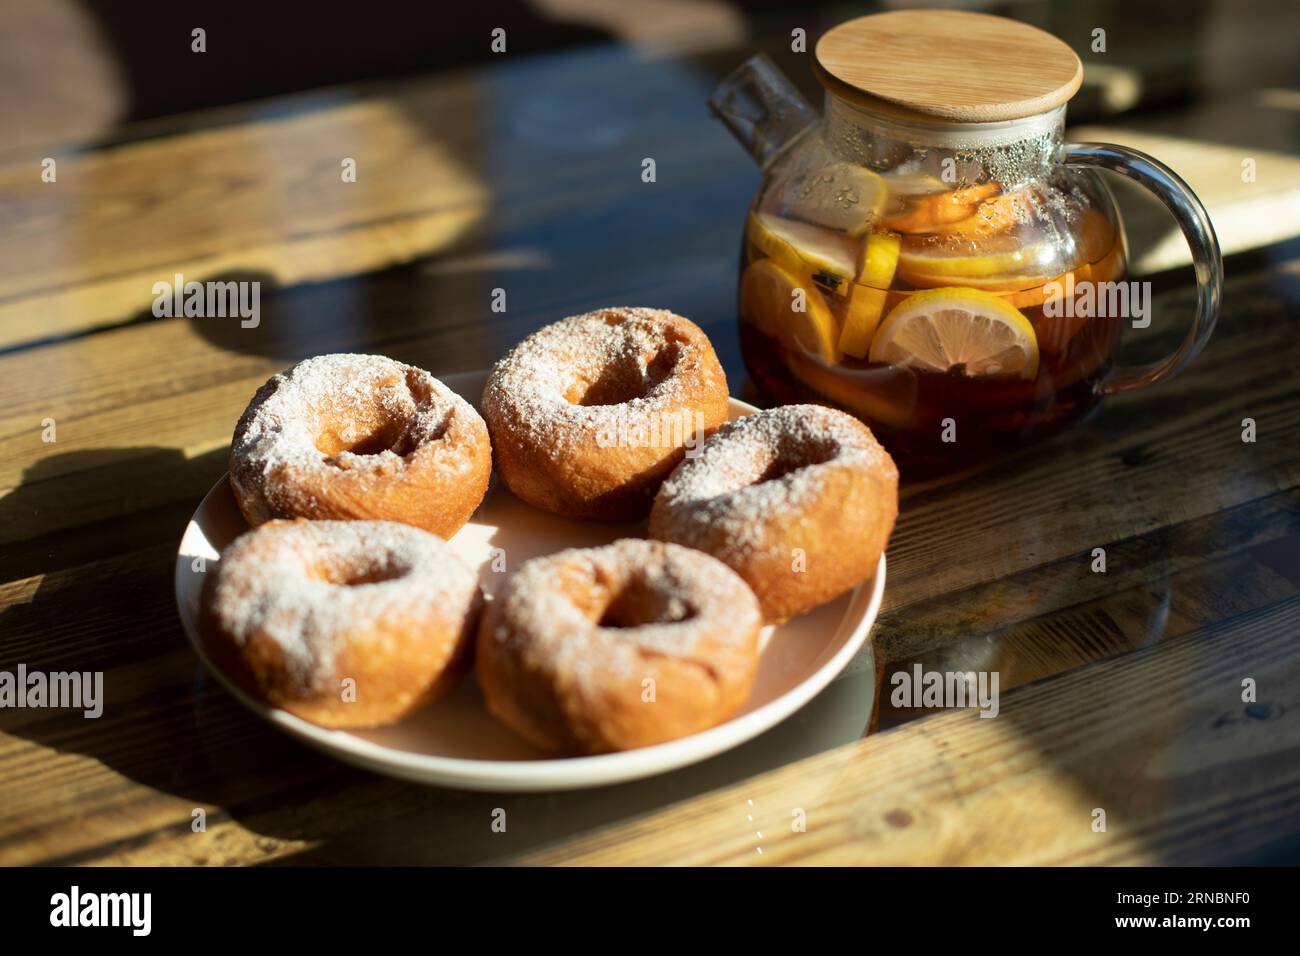 Donuts on table. Delicious food on table. Breakfast in morning. Stock Photo